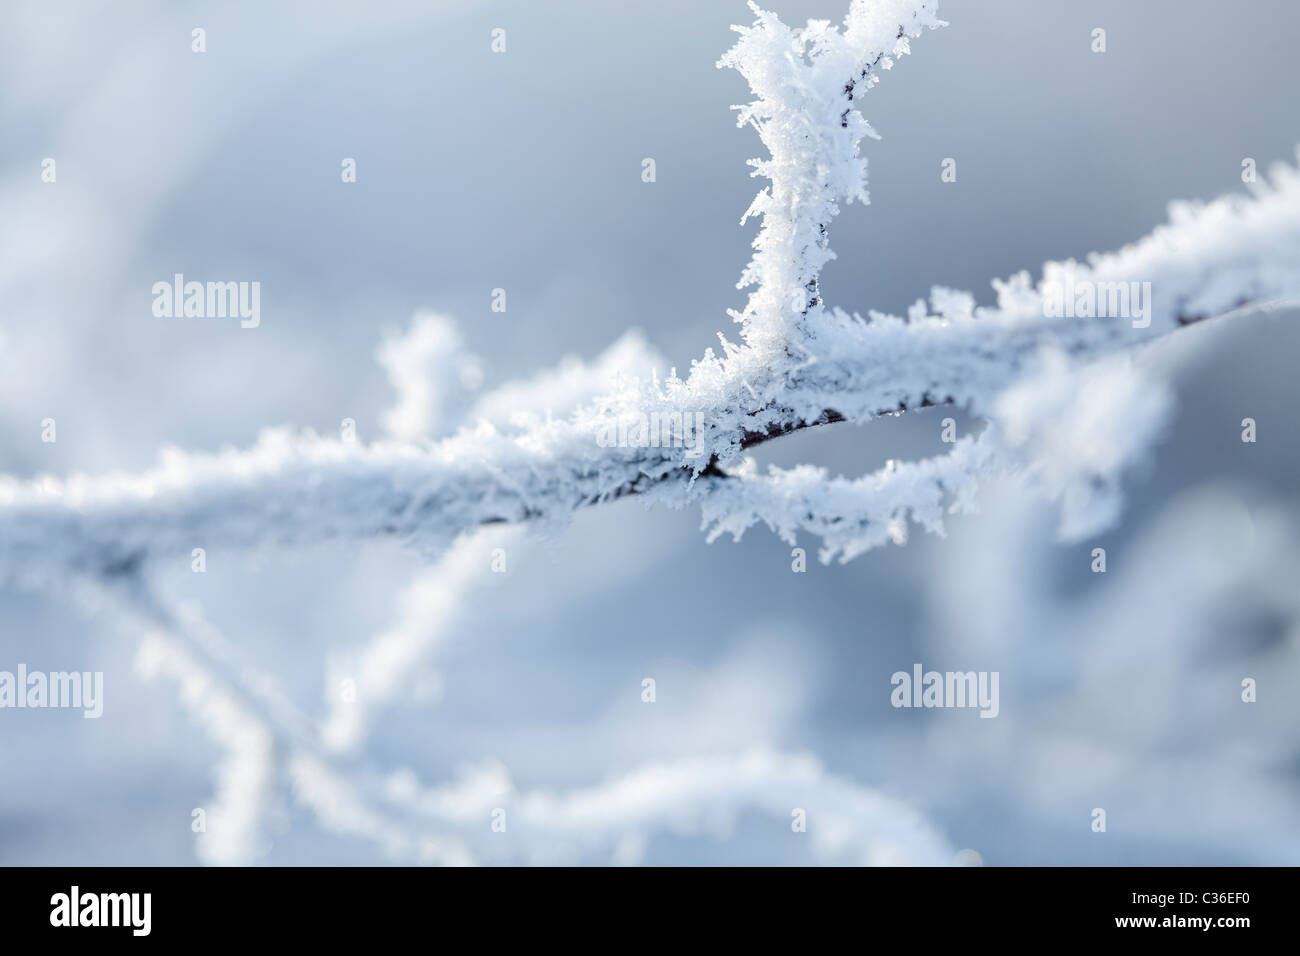 branches covered in snow and ice crystals Stock Photo